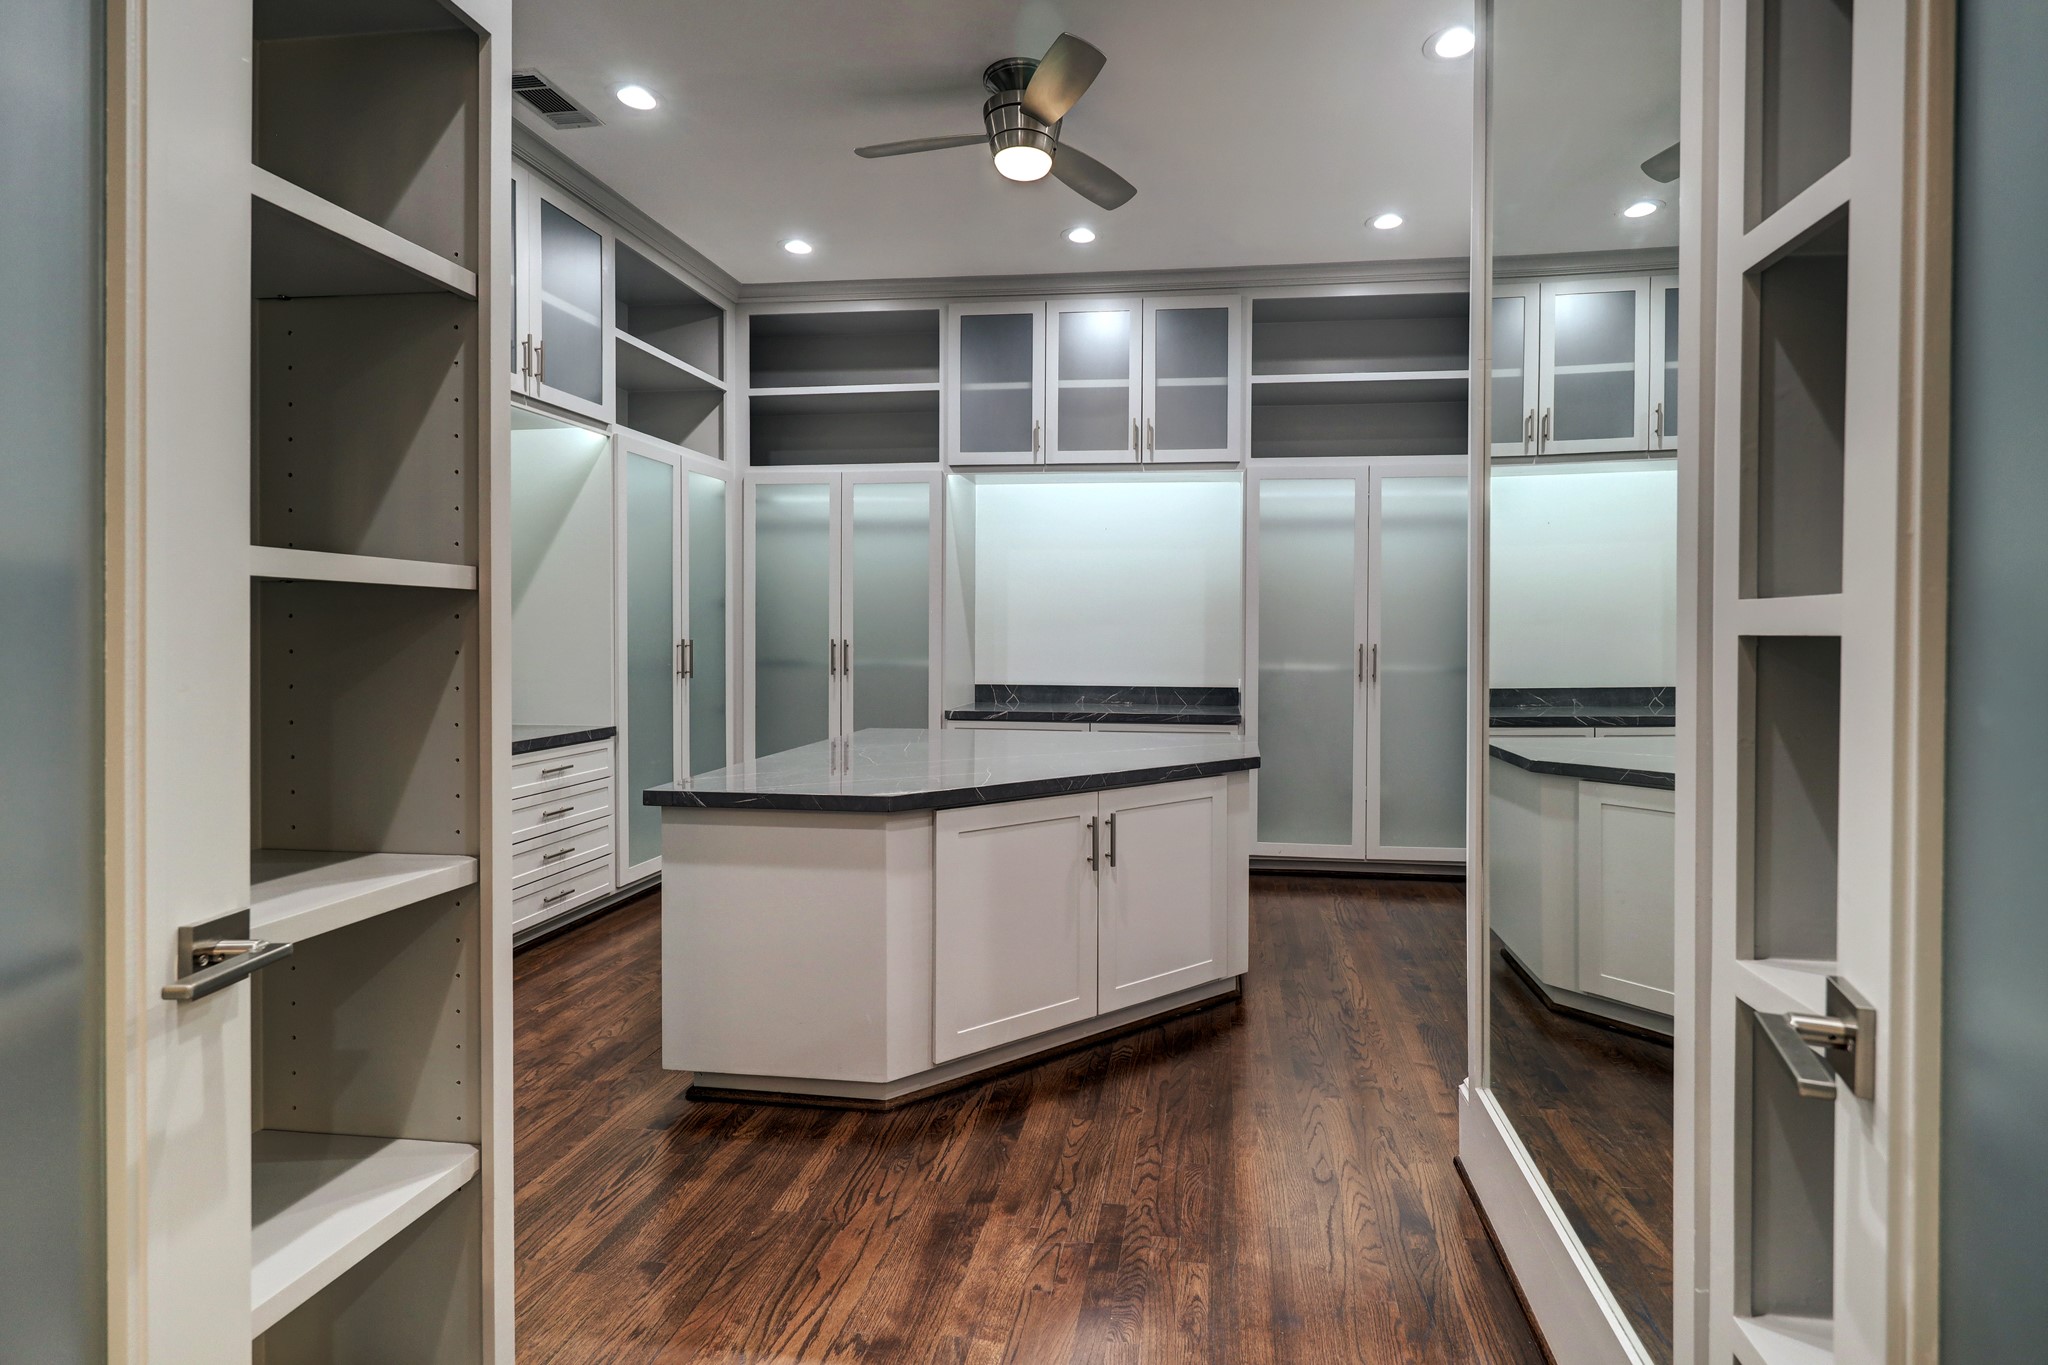 The Primary Walk-in Closet is huge and features hardwood floors, built-in floor length mirror, tons of cabinets (some of which are frosted glass-faced) and drawers for clothes and accessories of all sizes and types, and a large packing island with additional storage.